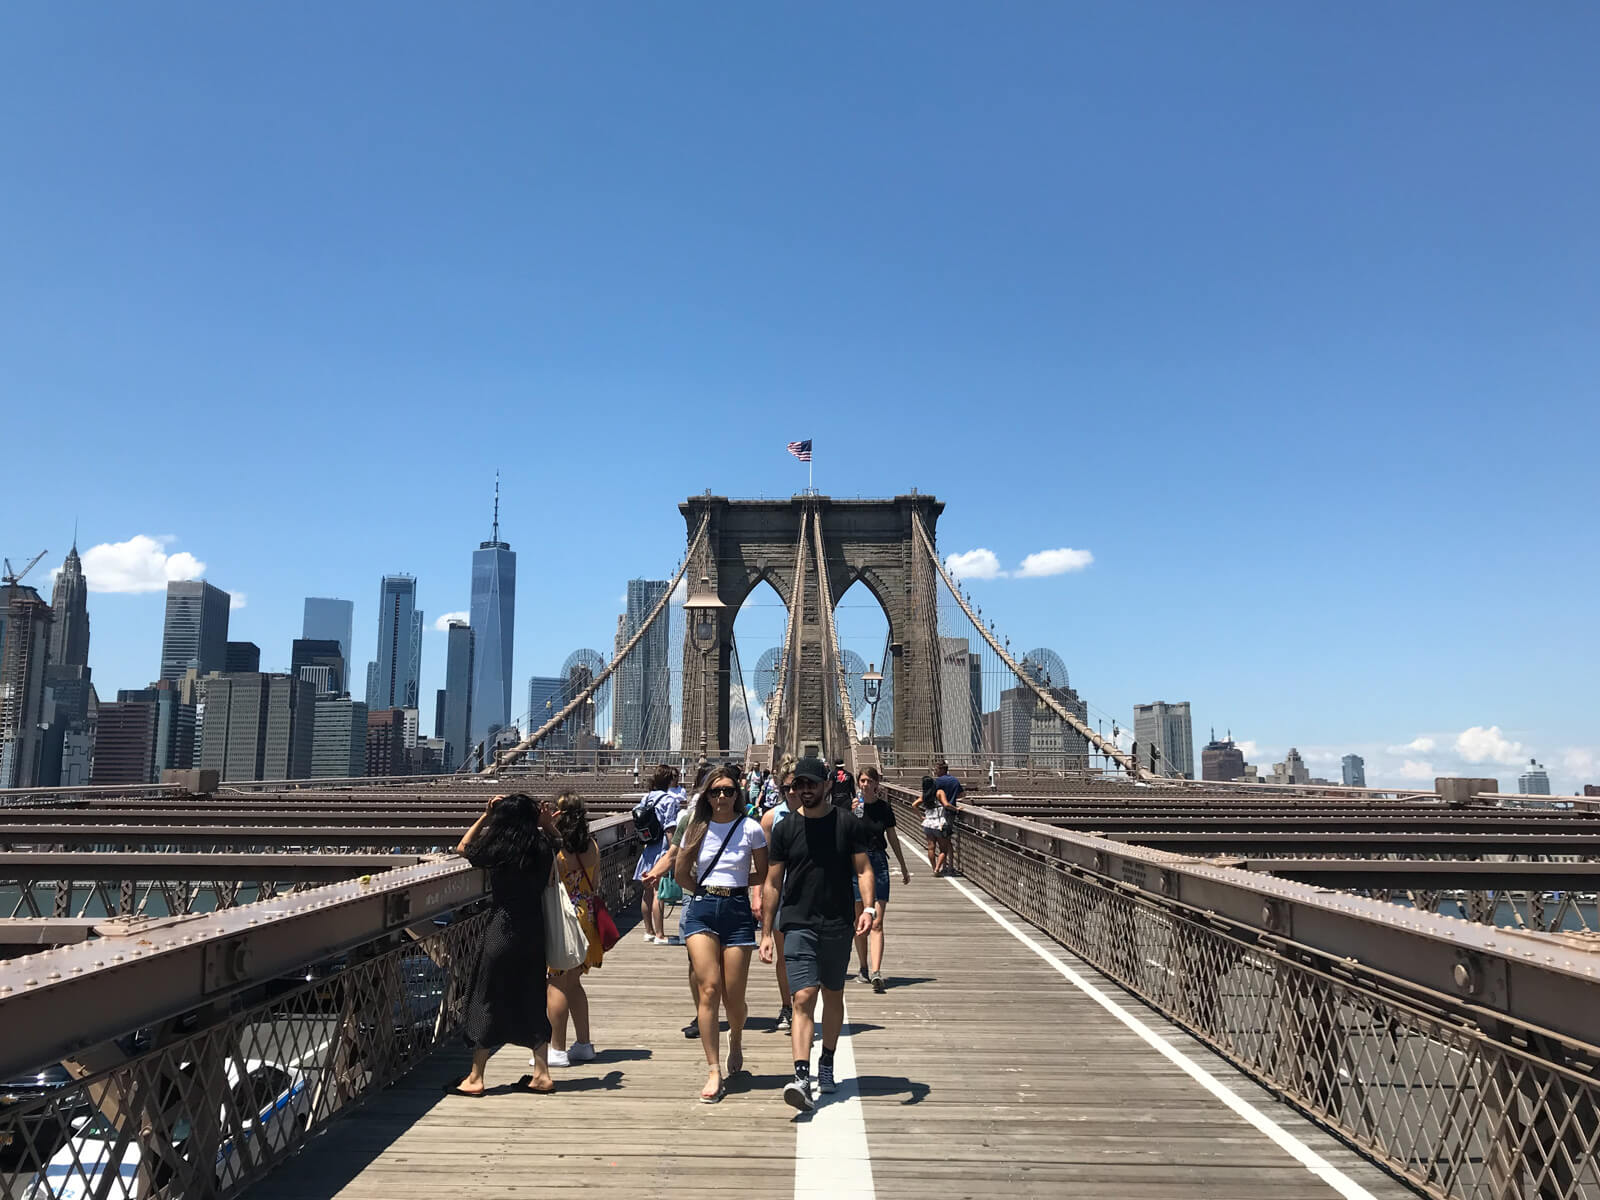 The Brooklyn Bridge as seen from the view of someone walking on it. There are some people on the bridge walking and others standing to the sides